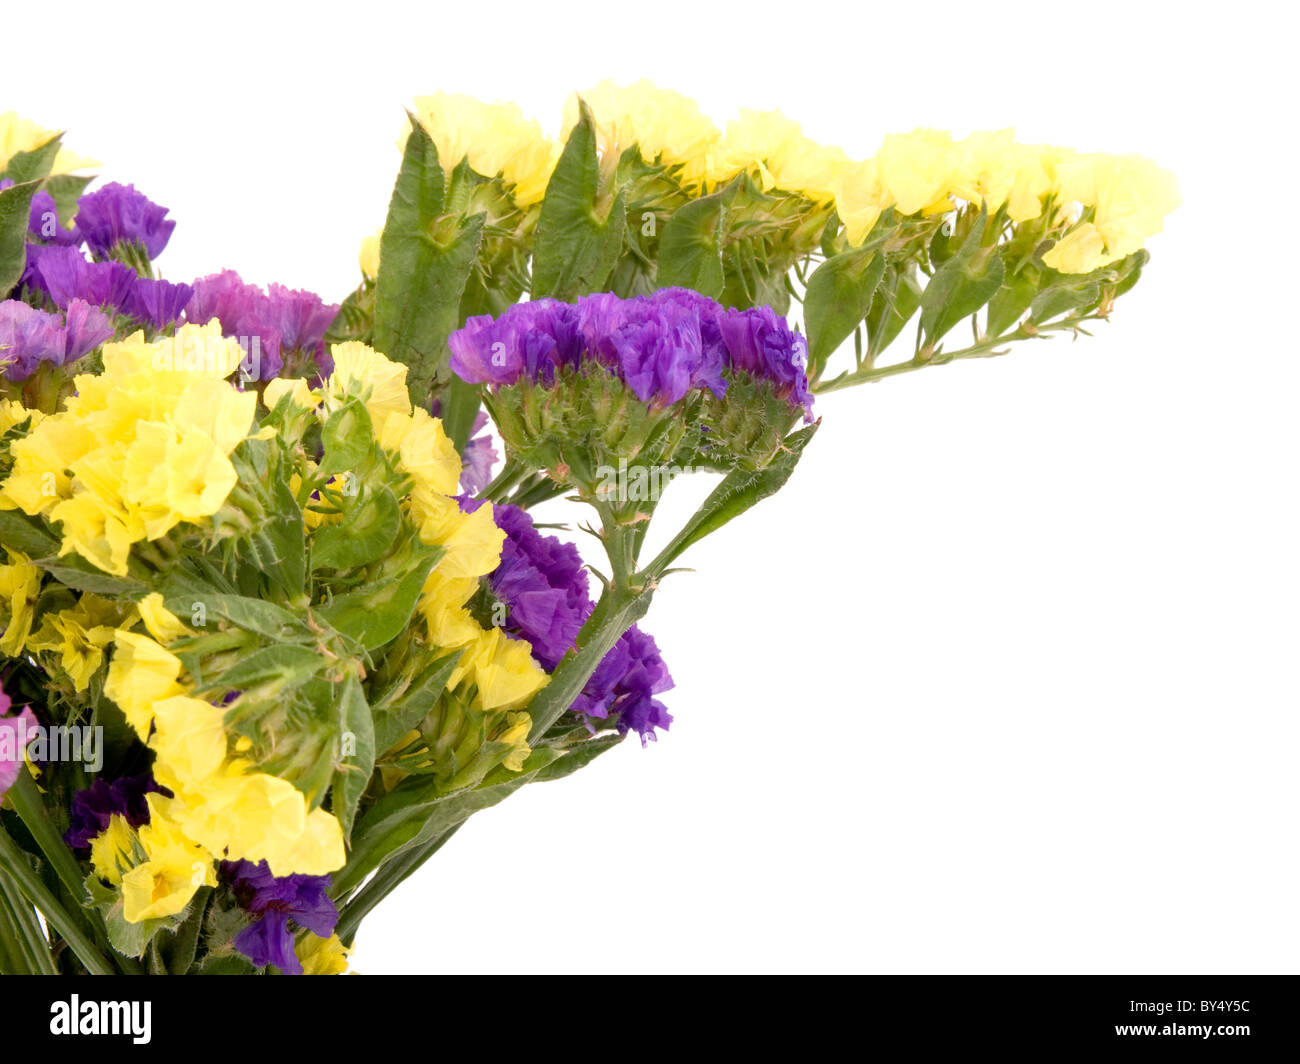 Closeup picture of a bouquet of beautiful statice flowers on white background. Stock Photo